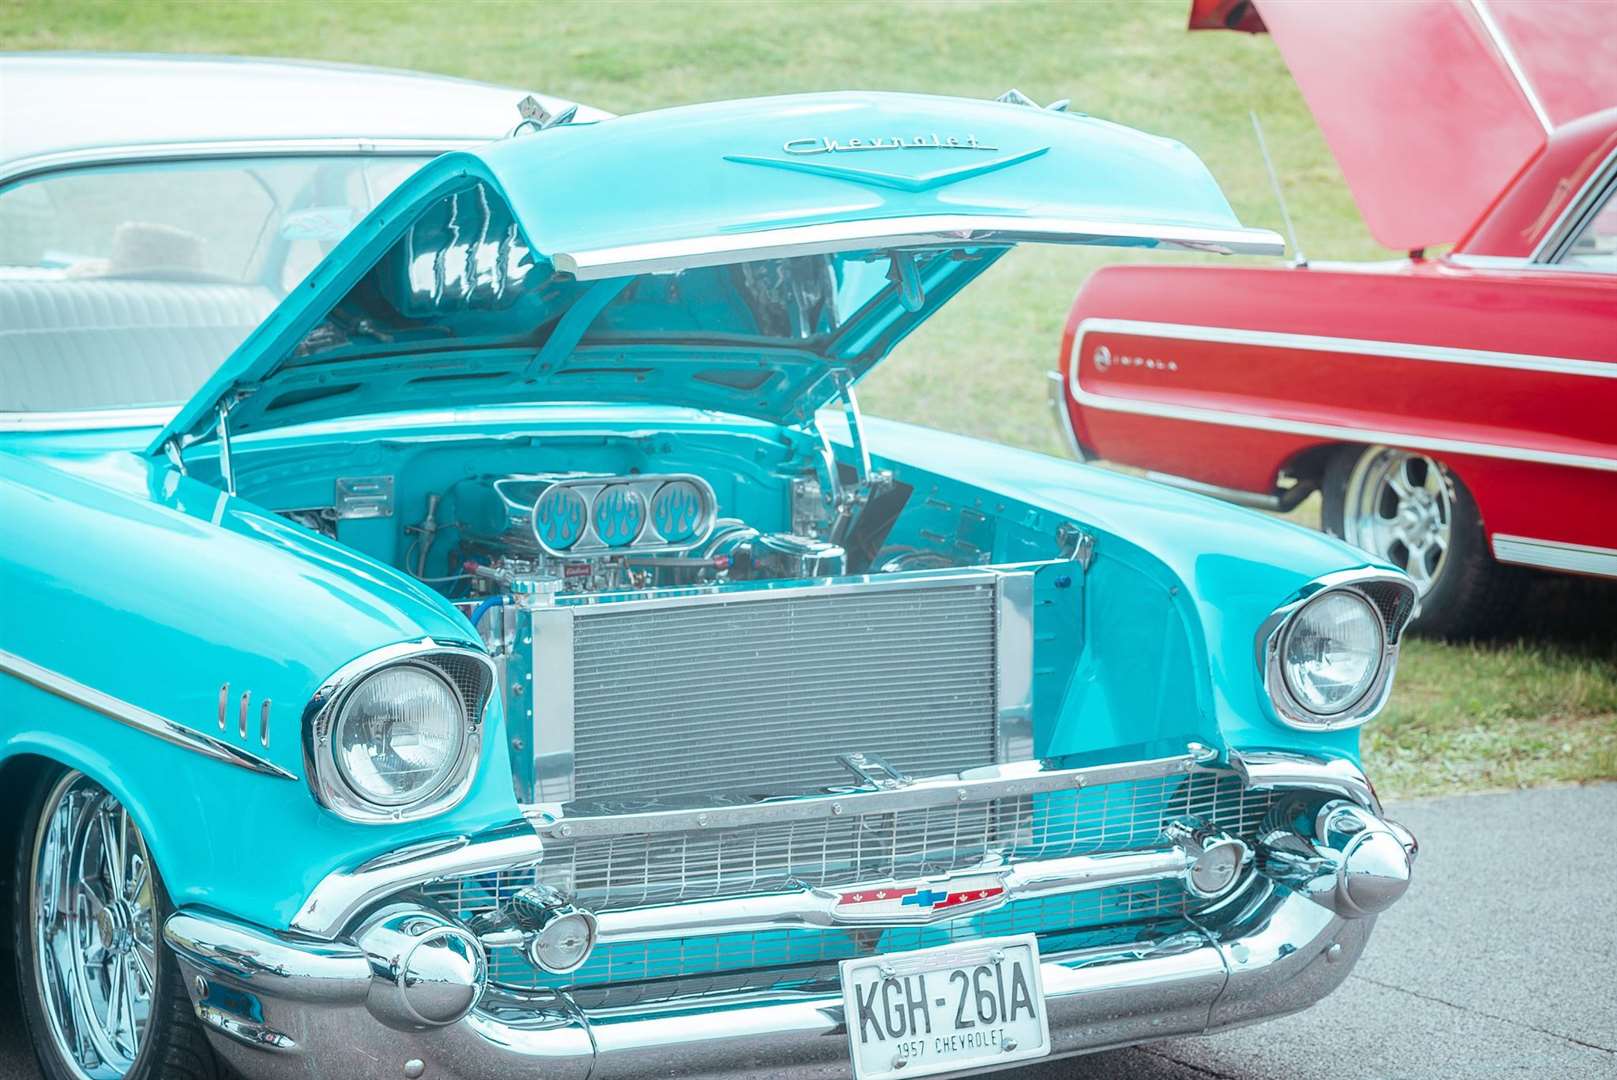 The Deal Classic Motor Show returns for its second year to Betteshanger Park in May.  Photo: Deal Classic Motor Show